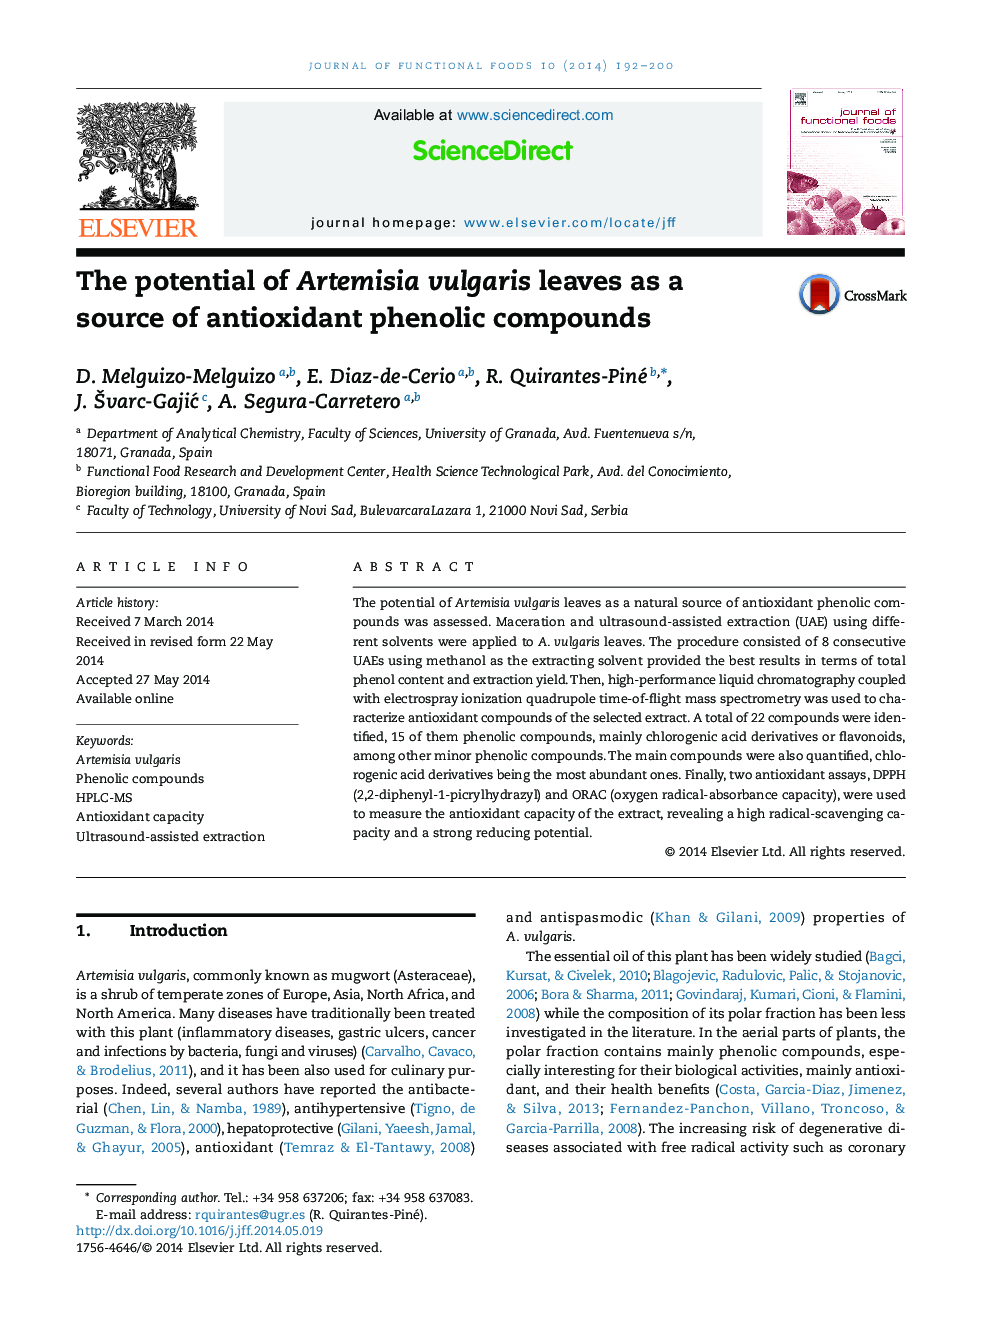 The potential of Artemisia vulgaris leaves as a source of antioxidant phenolic compounds